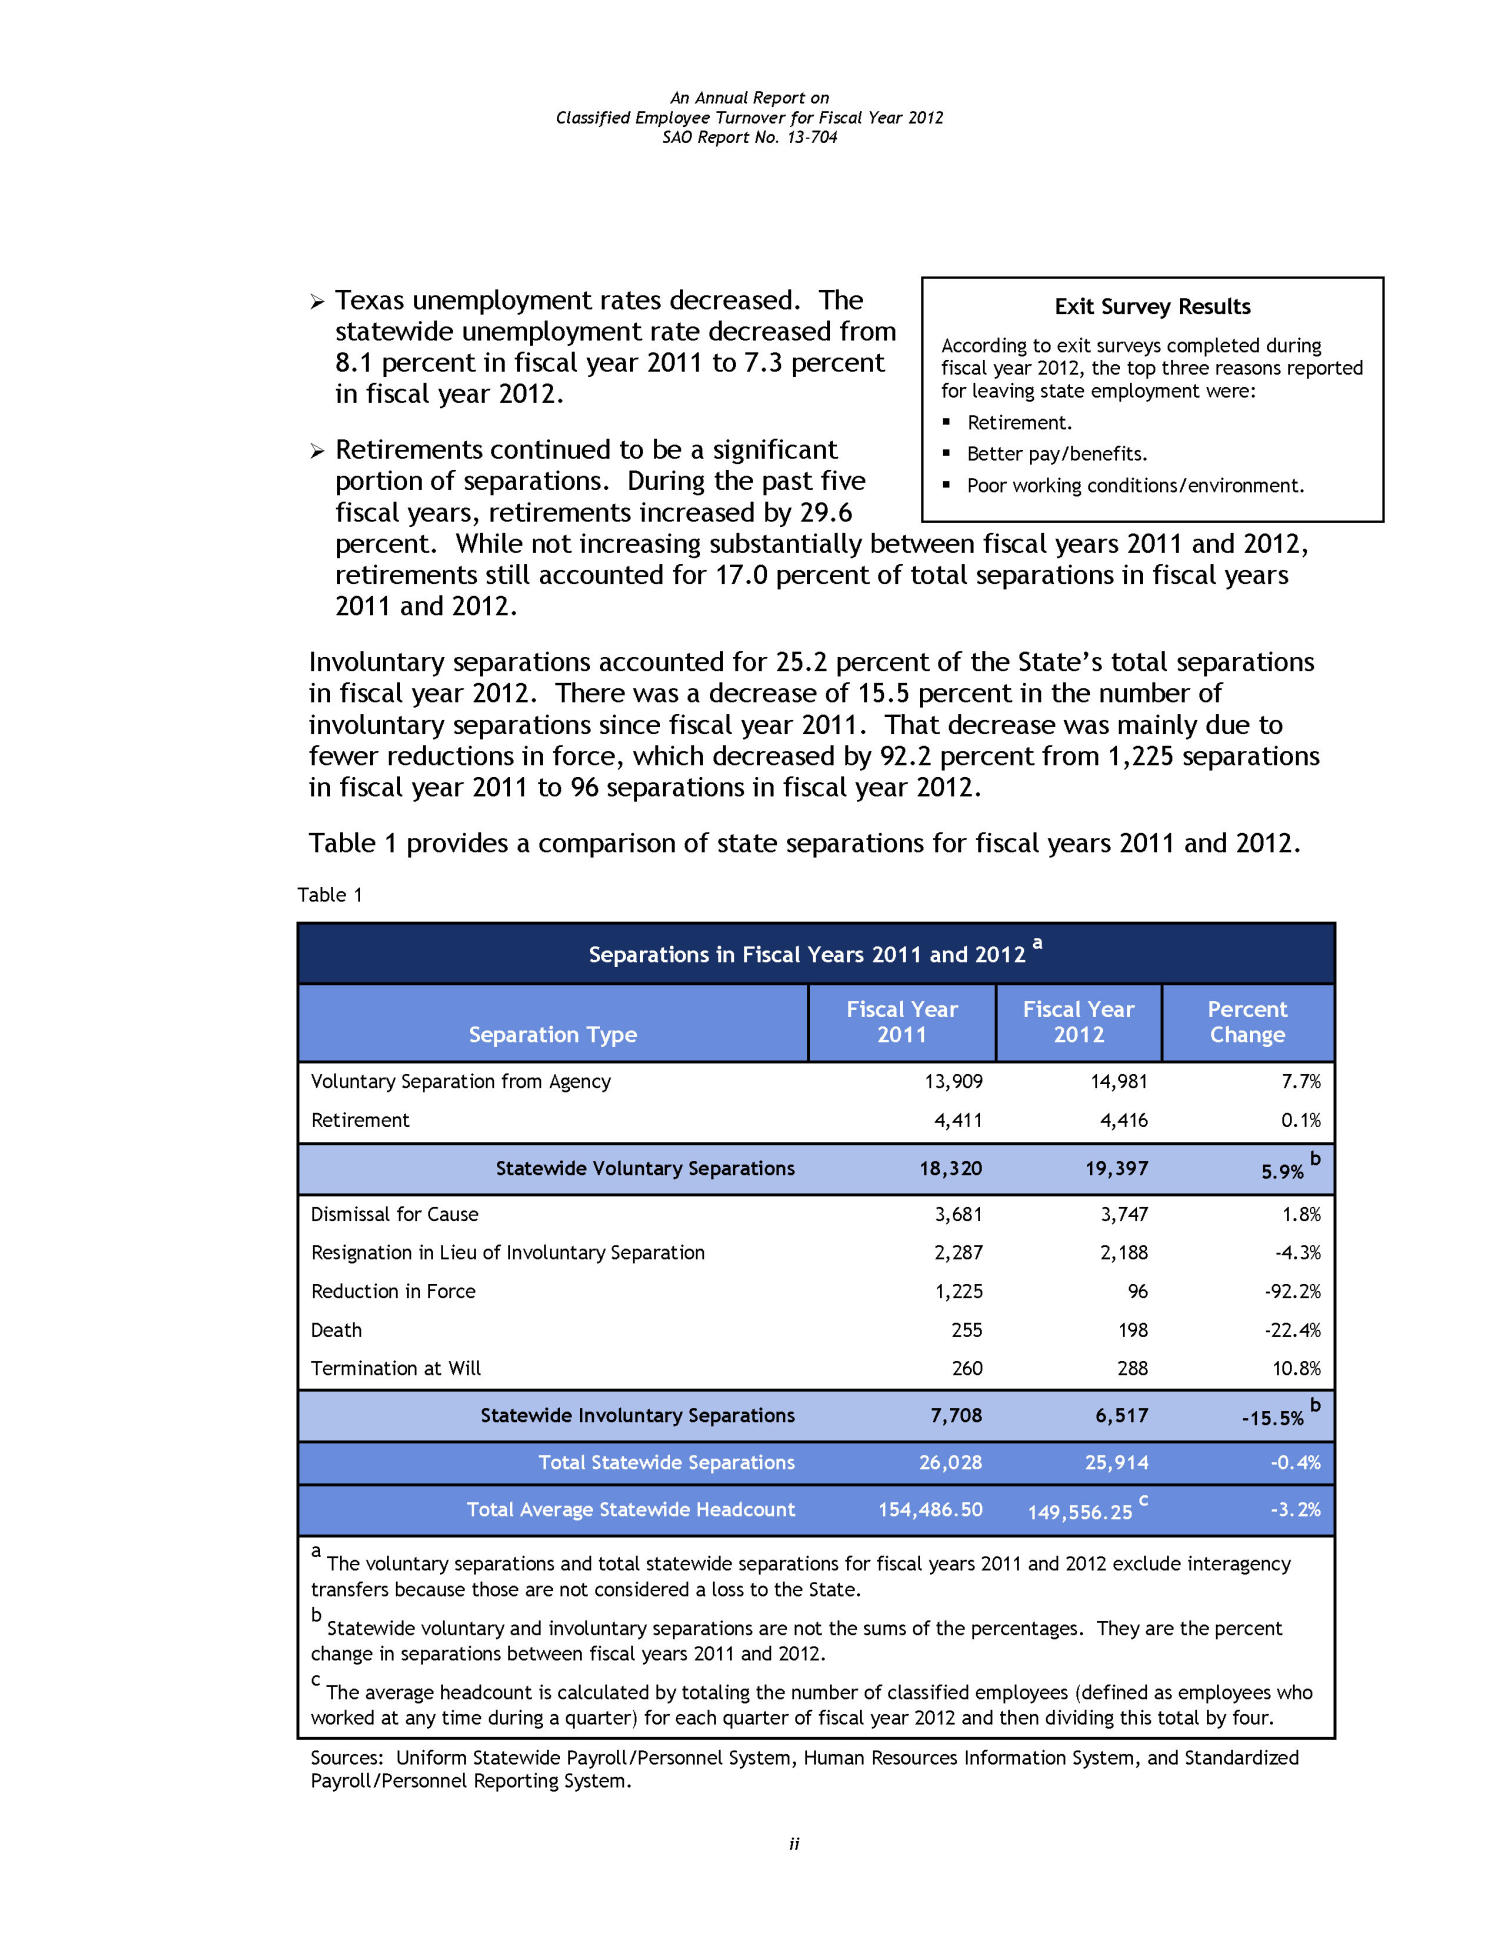 An Annual Report on Classified Employee Turnover for Fiscal Year 2012
                                                
                                                    [Sequence #]: 3 of 64
                                                